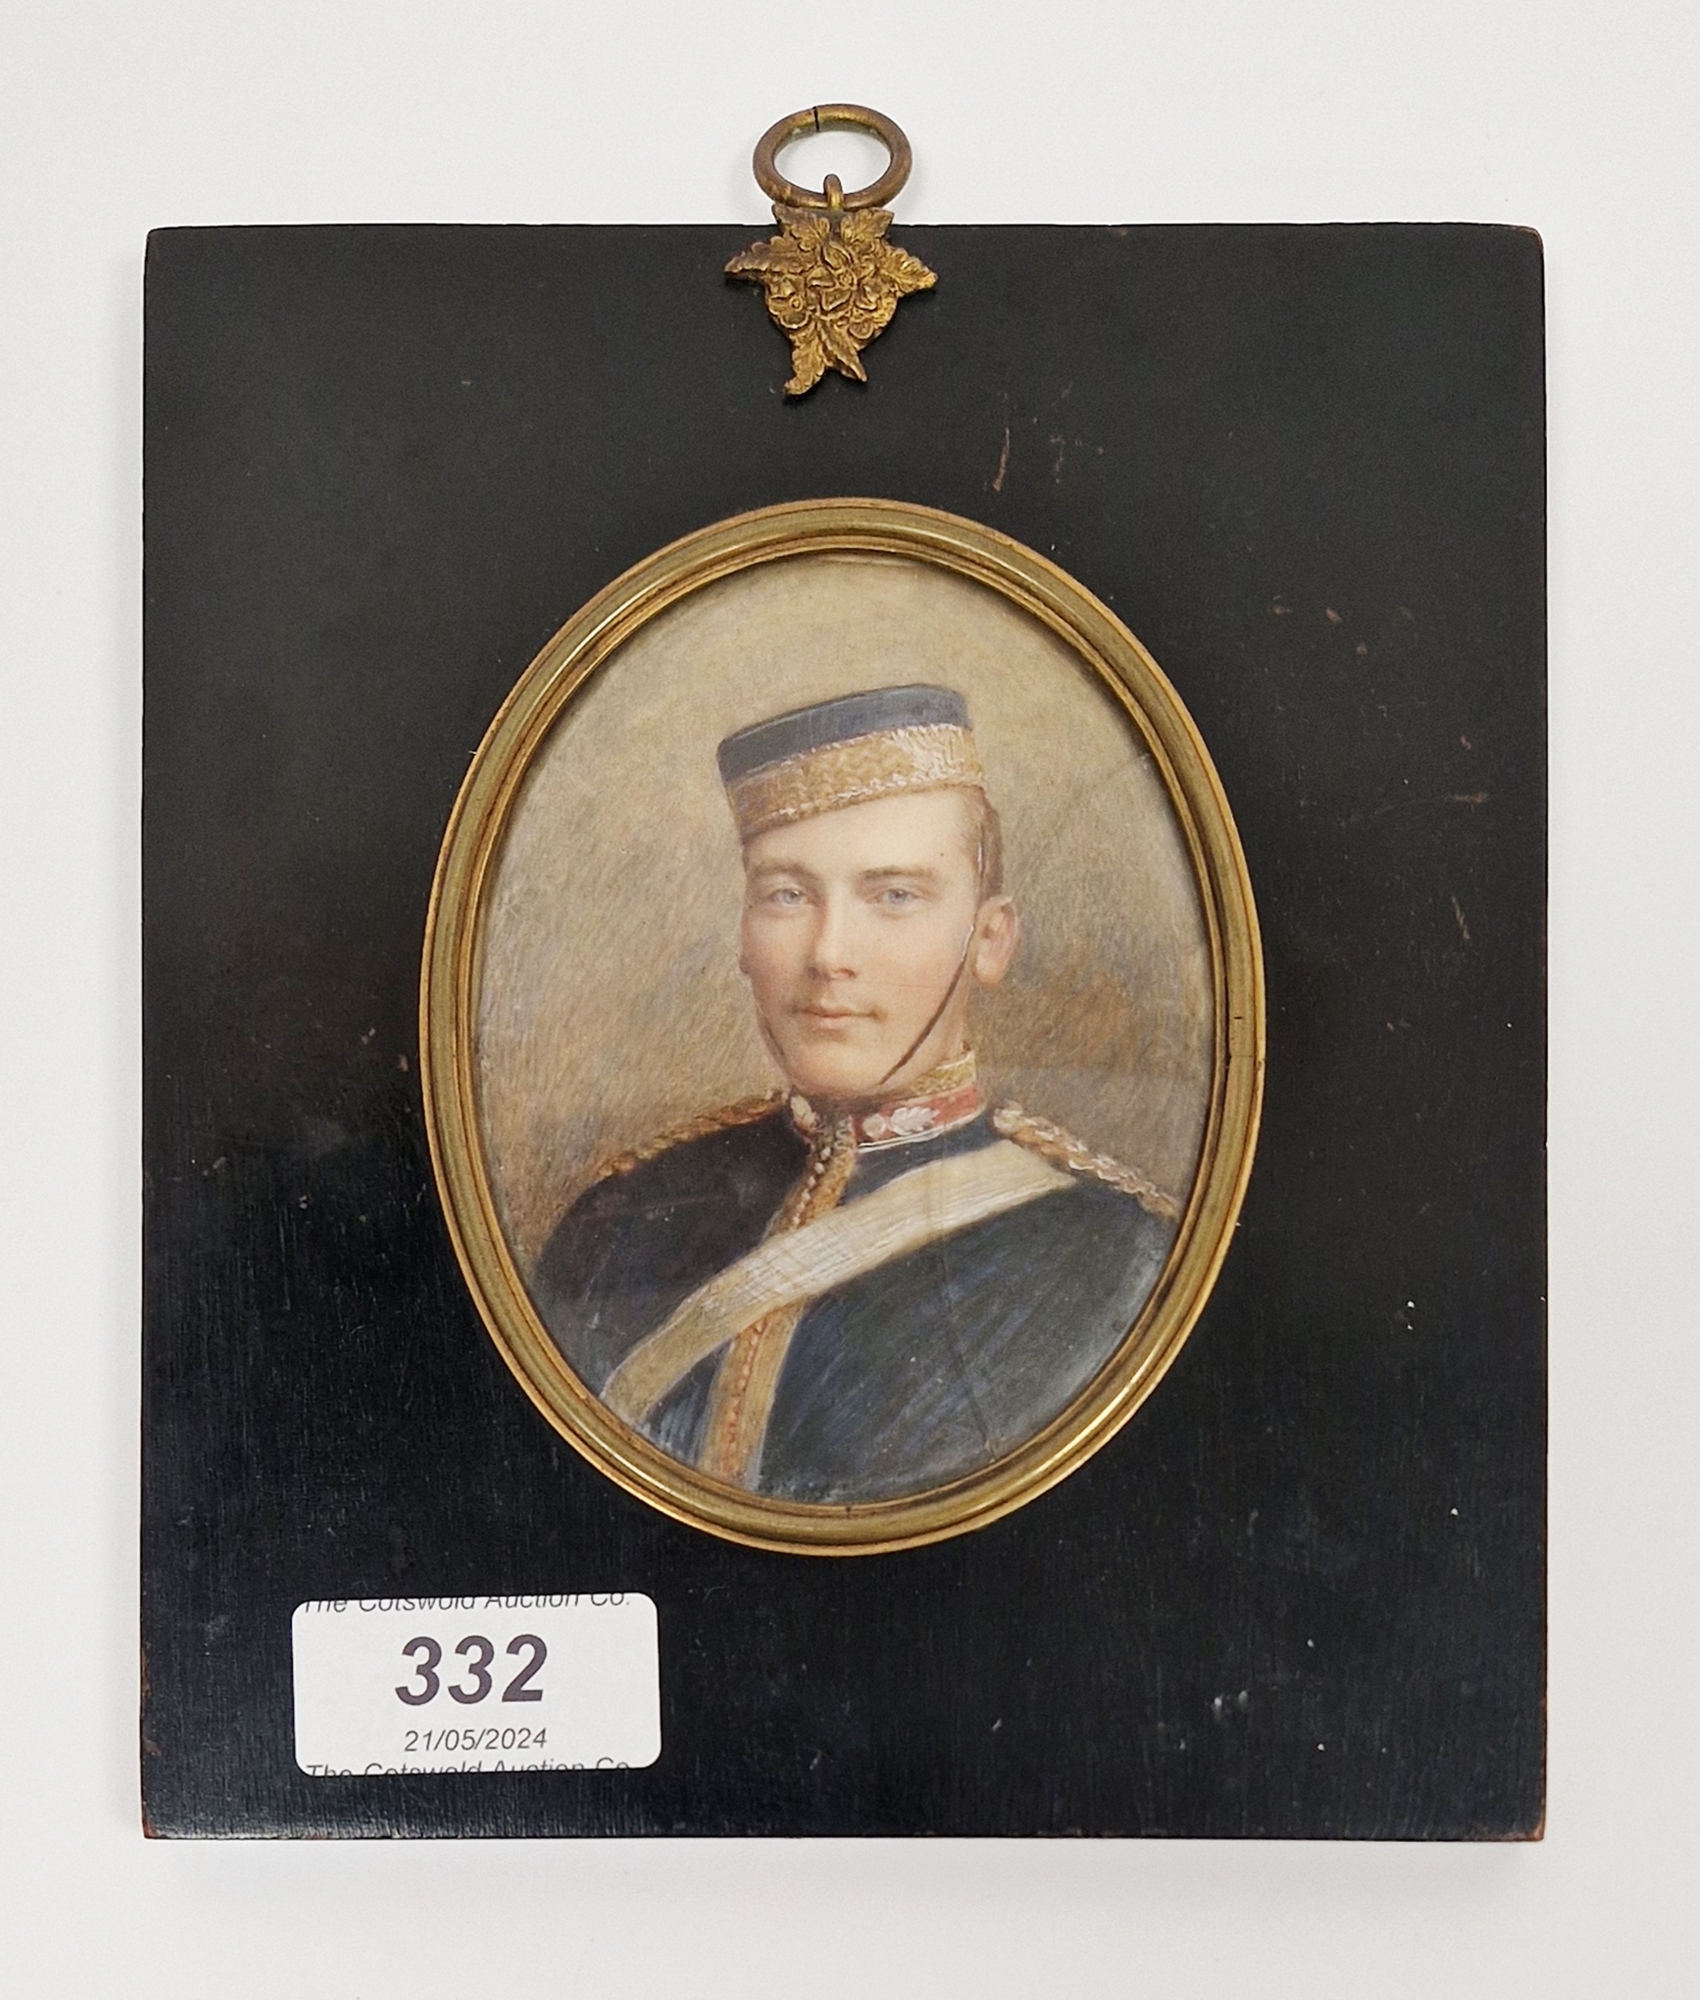 19th century portrait miniature on ivory depicting a soldier in military dress, glazed and mounted